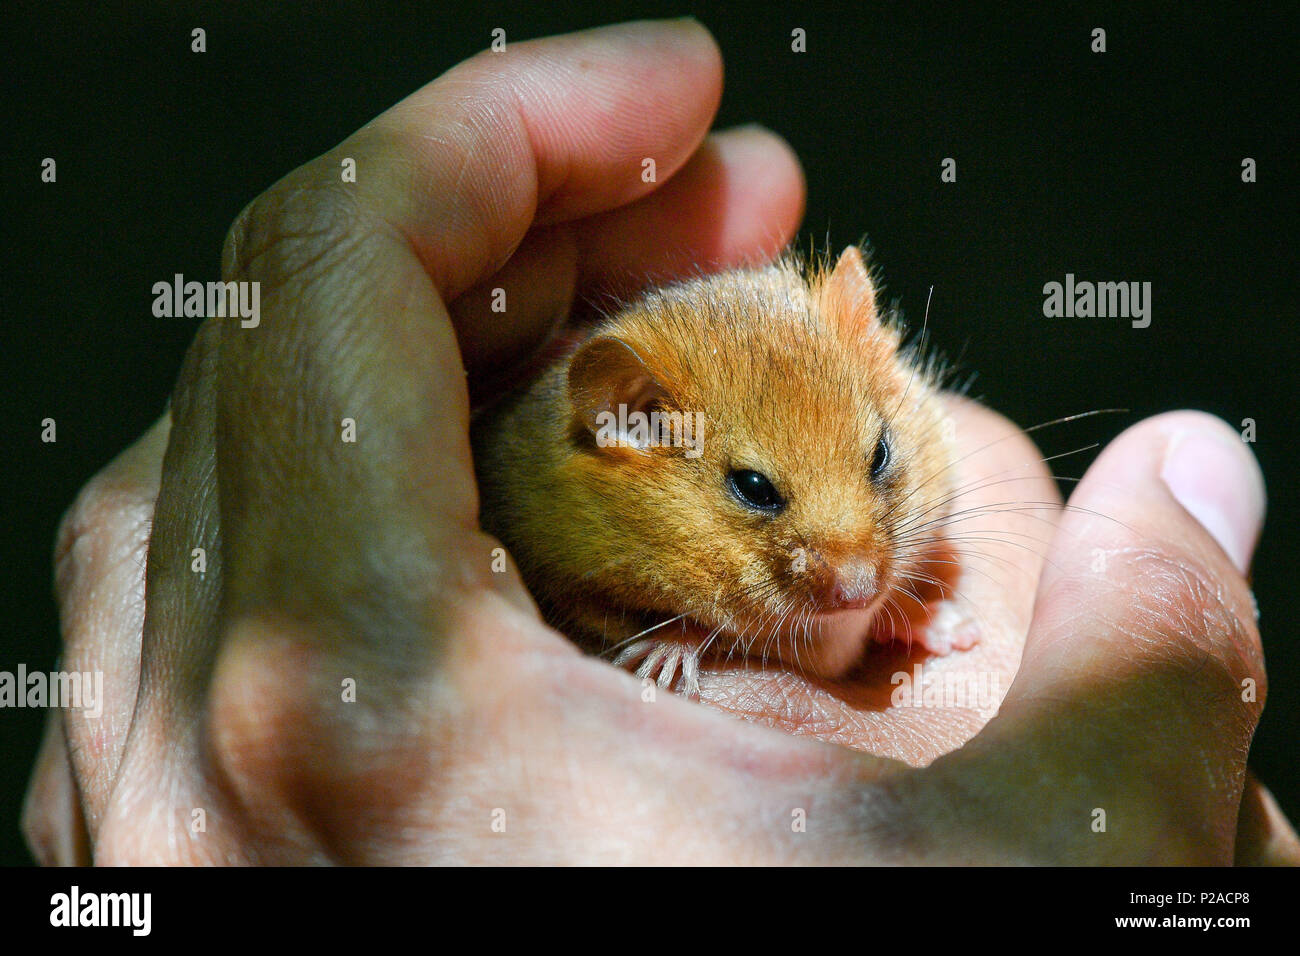 A volunteer checks a hazel dormouse as wildlife charity People's Trust for Endangered Species (PTES) in partnership with Warwickshire Wildlife Trust and others, release 20 breeding pairs or trios of rare hazel dormice into an undisclosed woodland location near Royal Leamington Spa in Warwickshire. Stock Photo